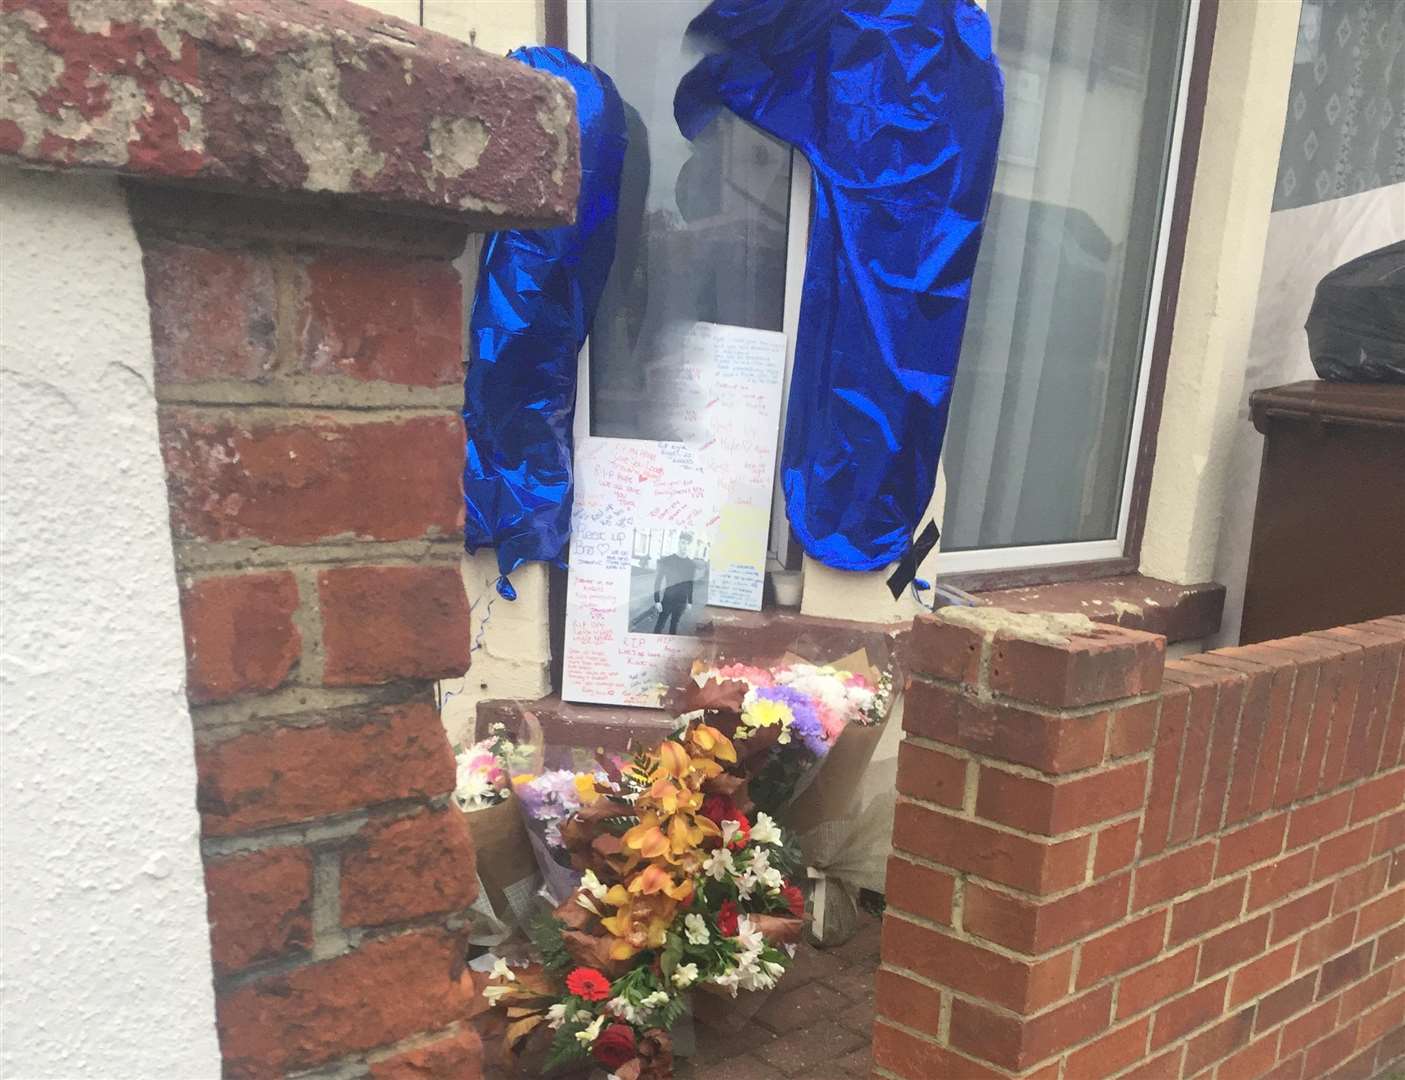 A shrine set up in memory of Kyle Yule outside his home